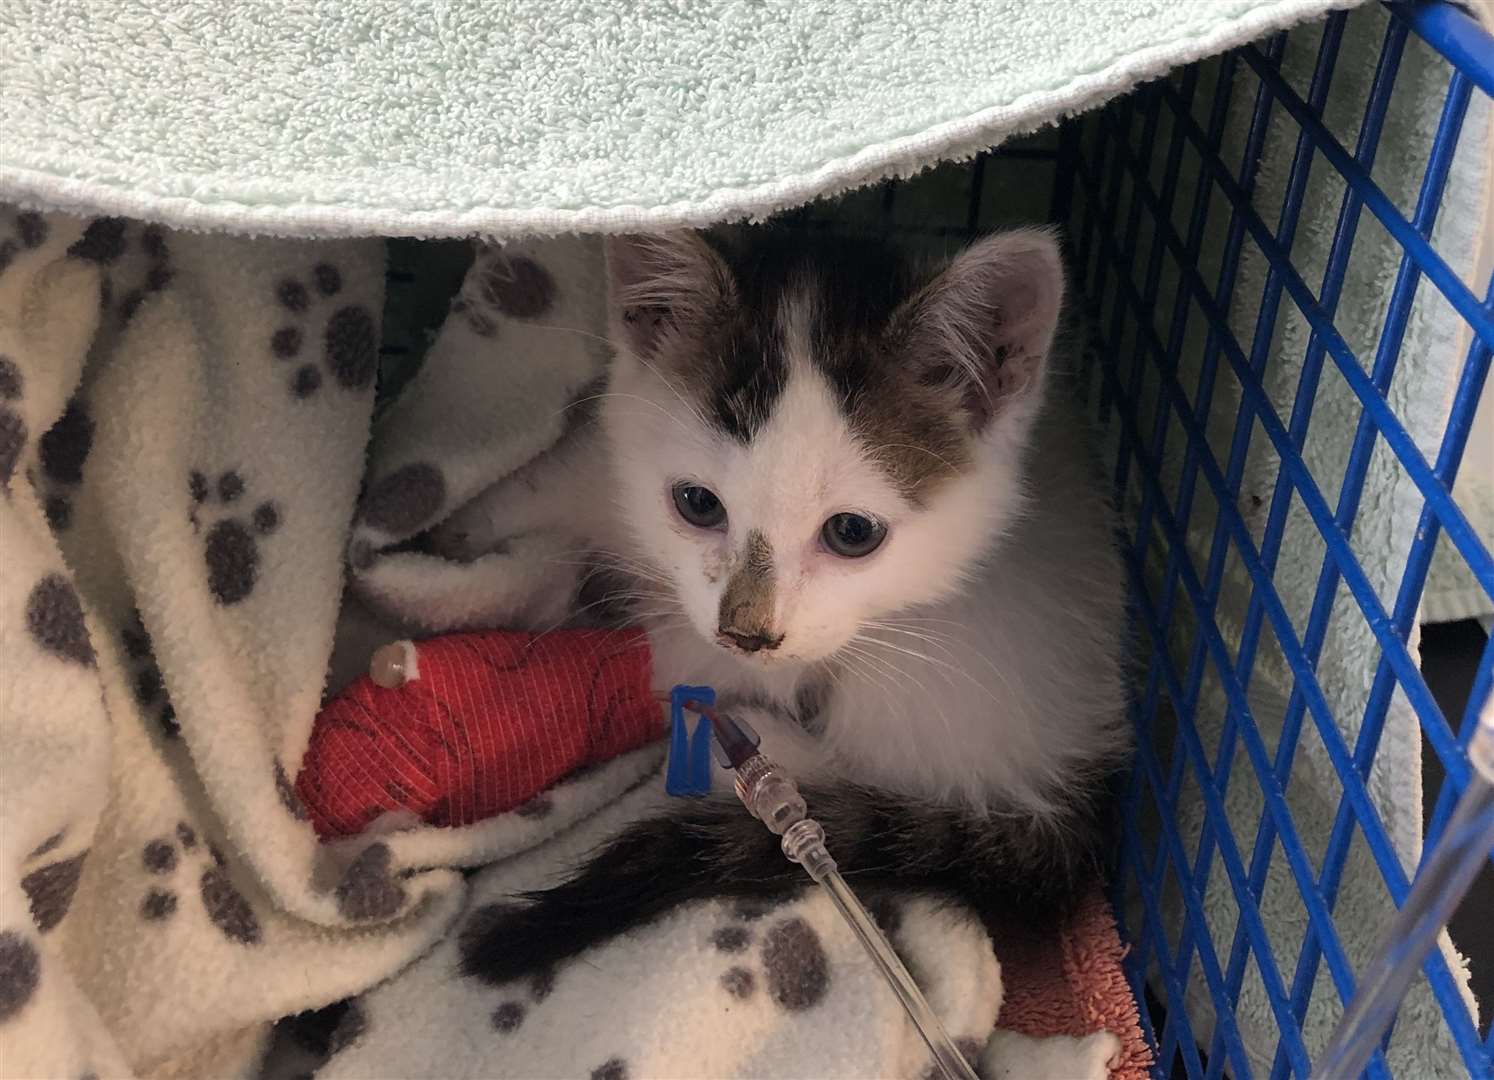 Another kitten called Cabbage was found dumped with a broken leg outside a vet surgery in Lydd last month